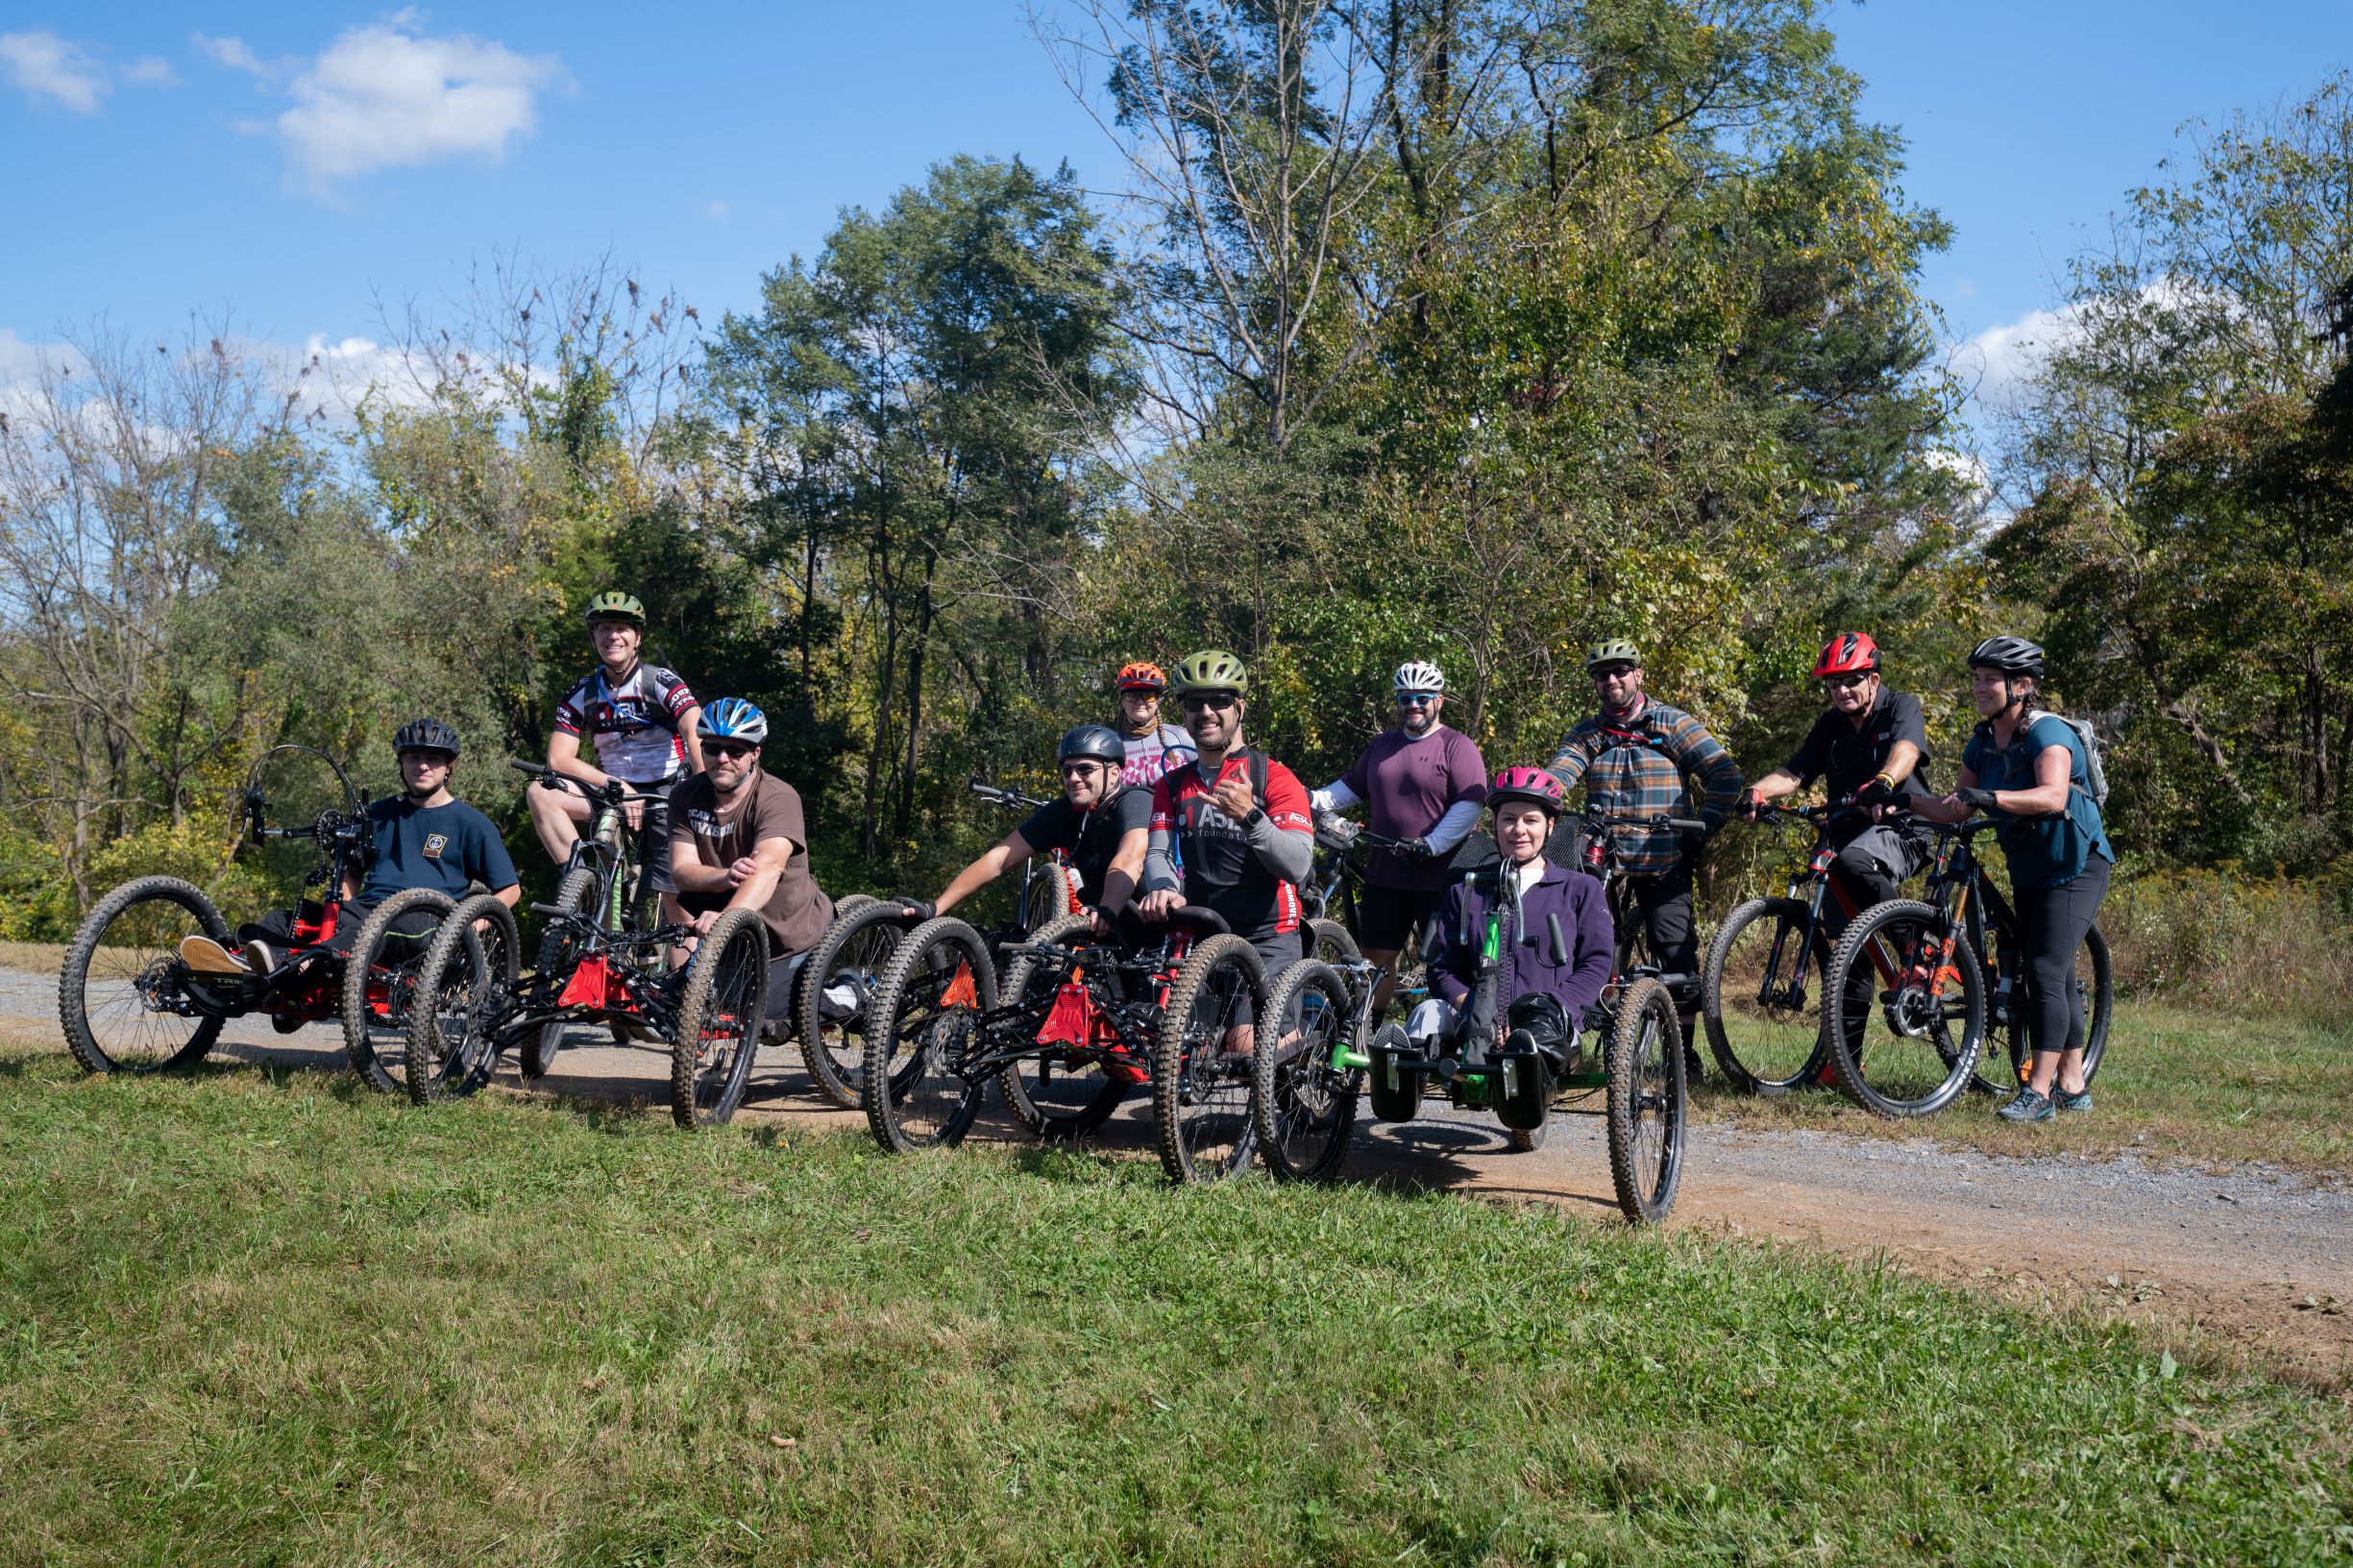 A group of smiling people on bicycles park on a field with the front row on adaptive bikes and a second row on regular bikes